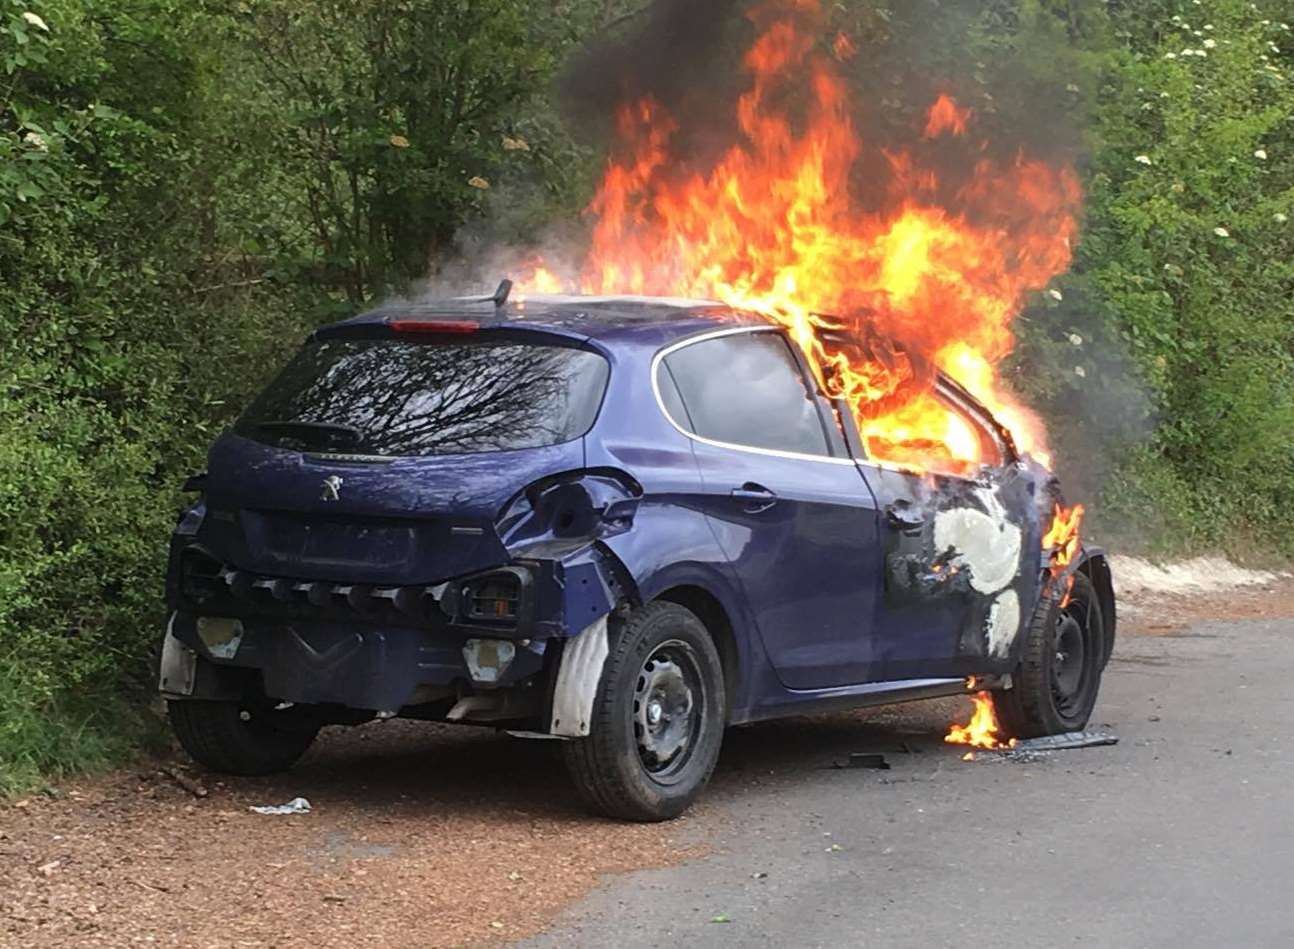 The vehicle was well alight when firefighters arrived